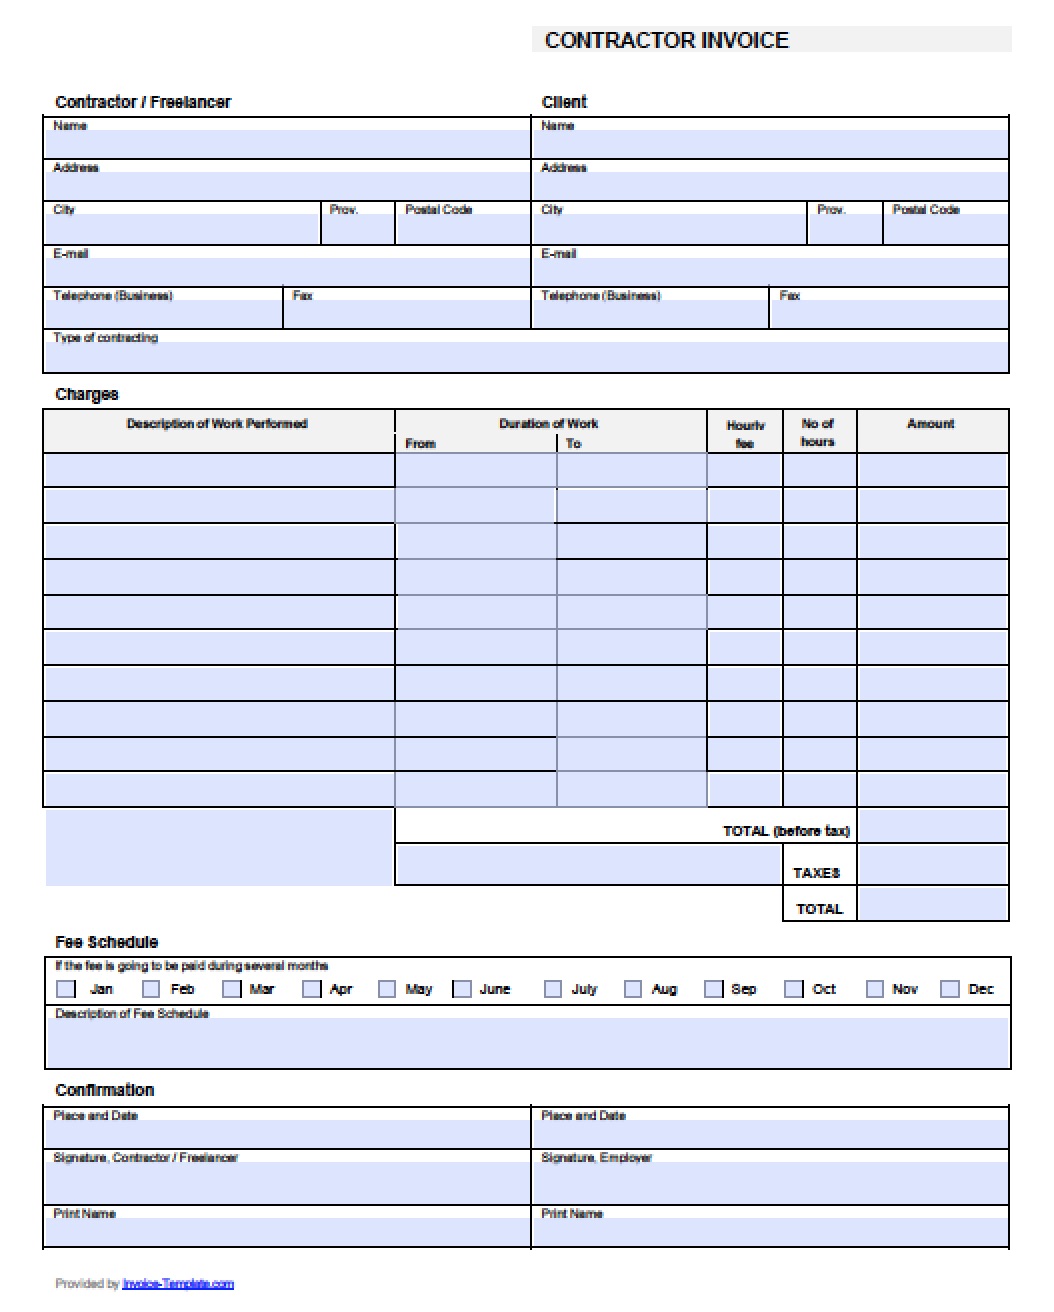 Draft Invoice Template from invoicetemplates.com